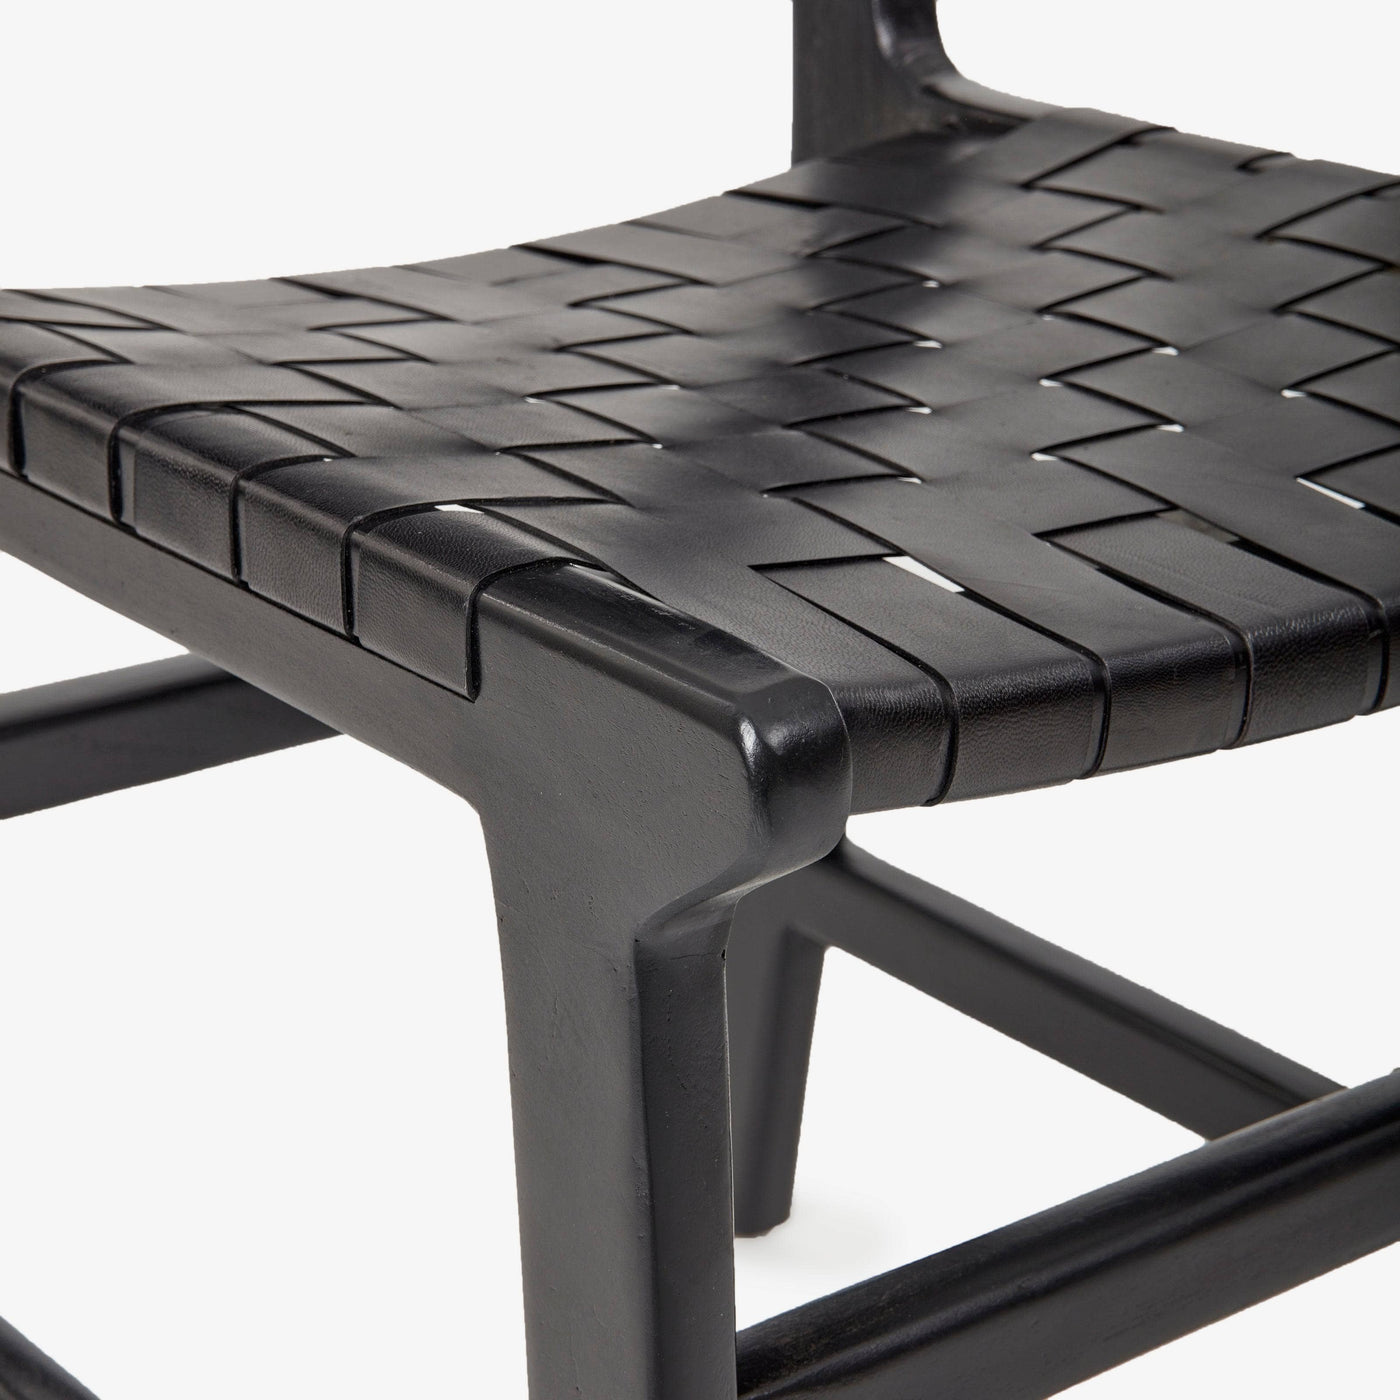 Pomero Woven Leather Dining Chair, Black Dining Chairs & Benches sazy.com